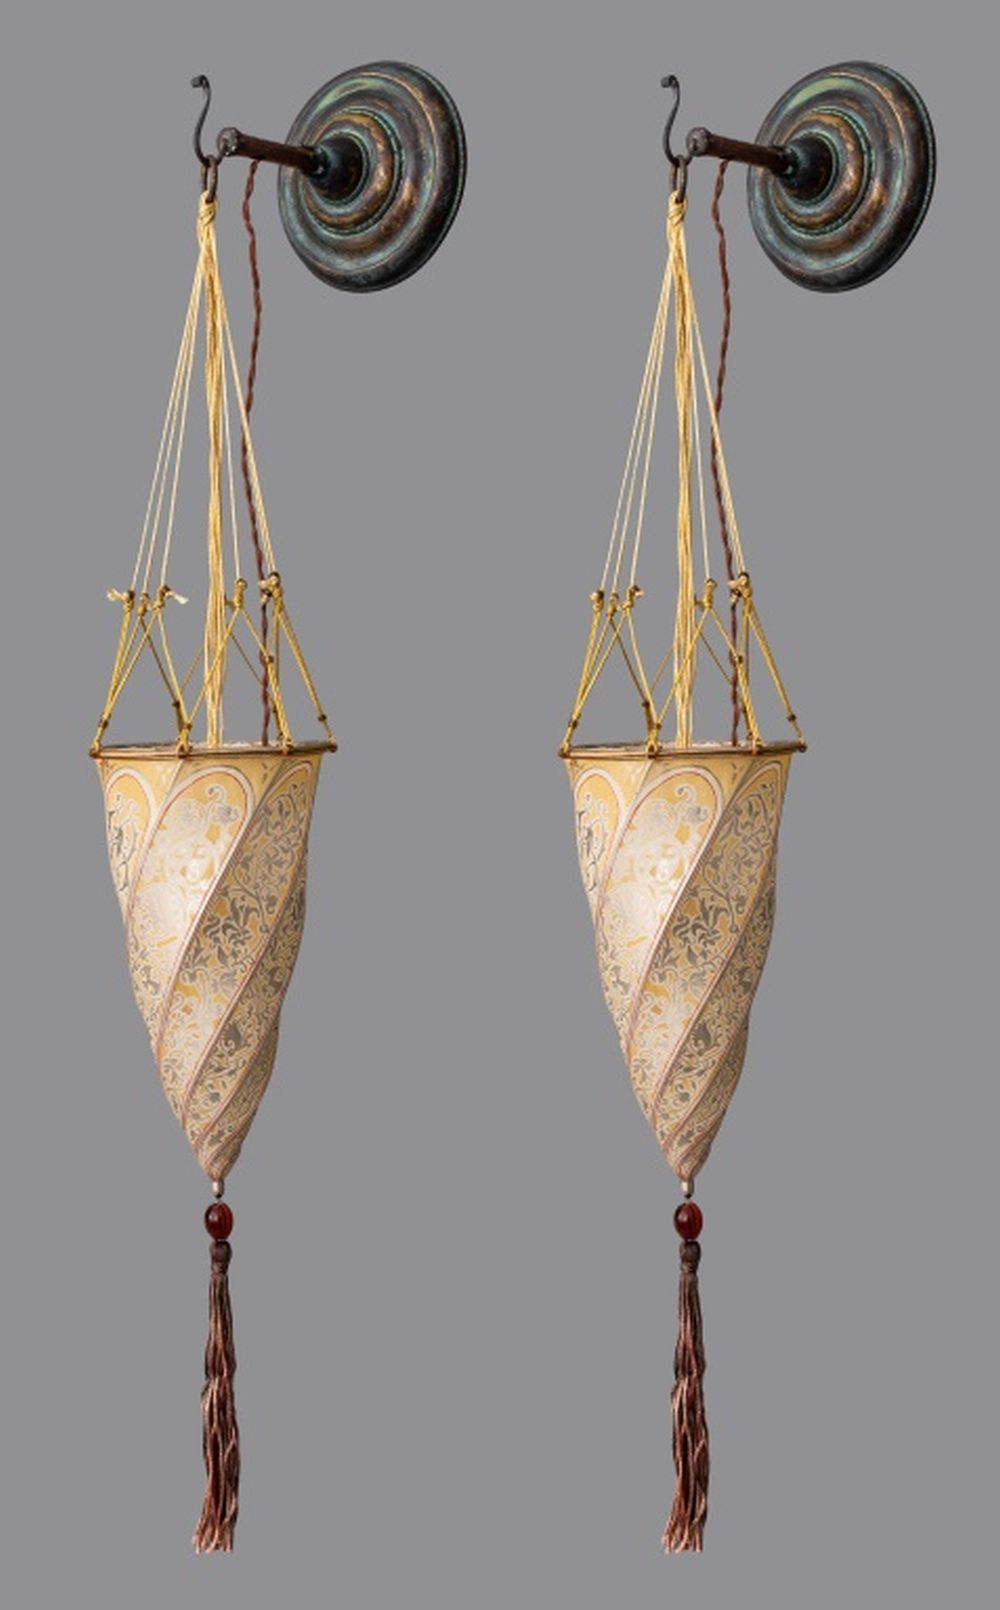 FORTUNY CESENDELLO SILK WALL SCONCES  36007a